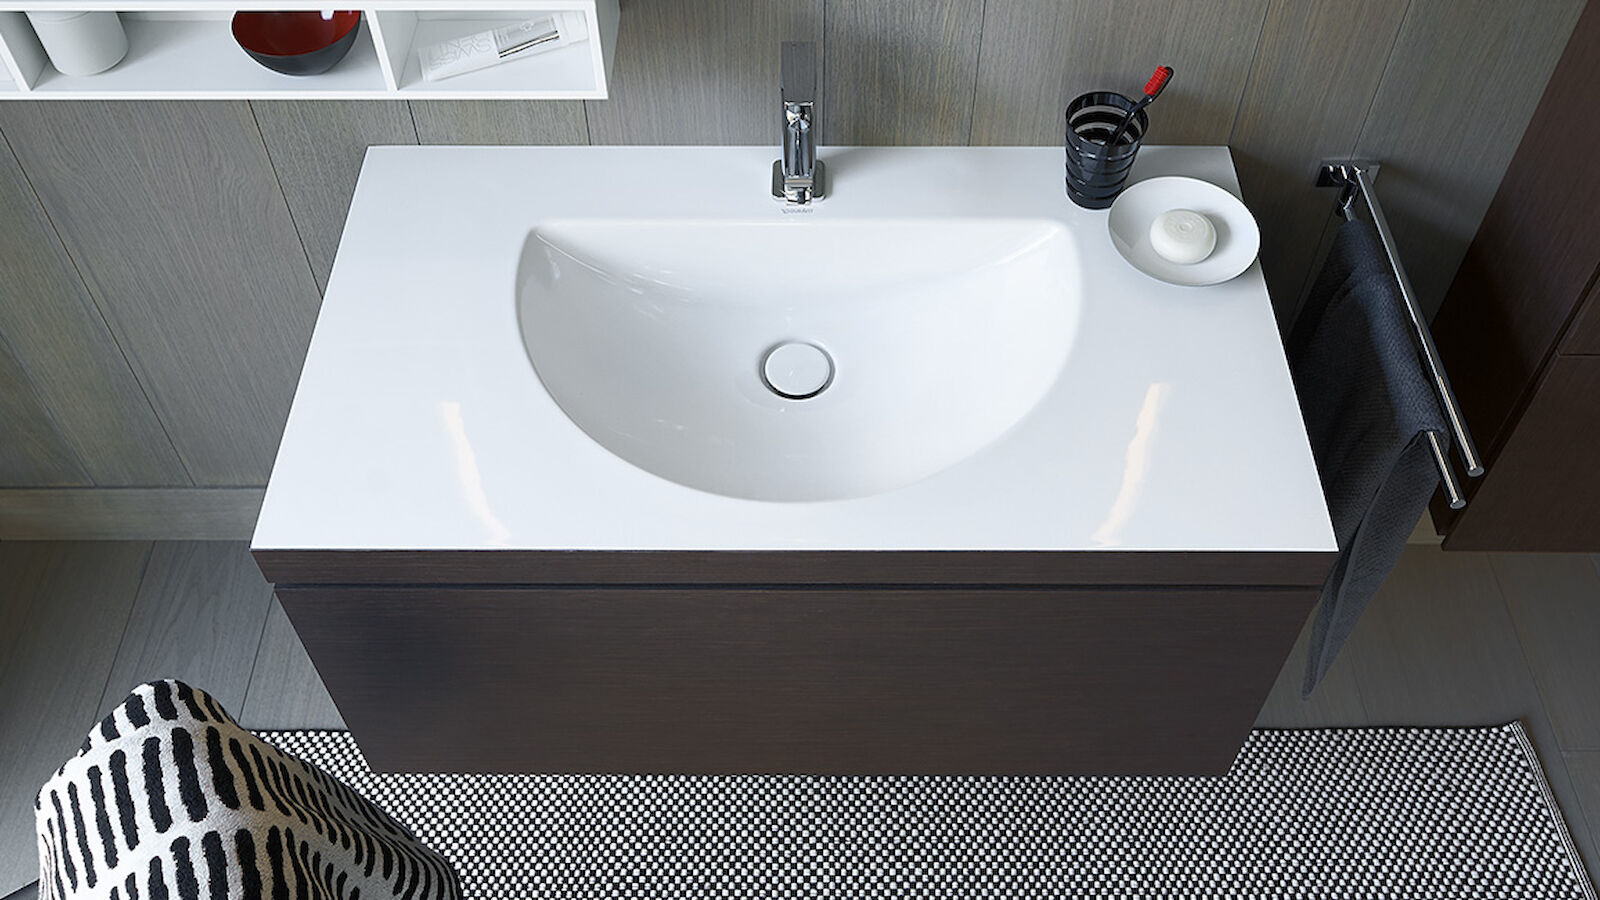 Relaunch of the Darling ceramic and furniture range for Duravit